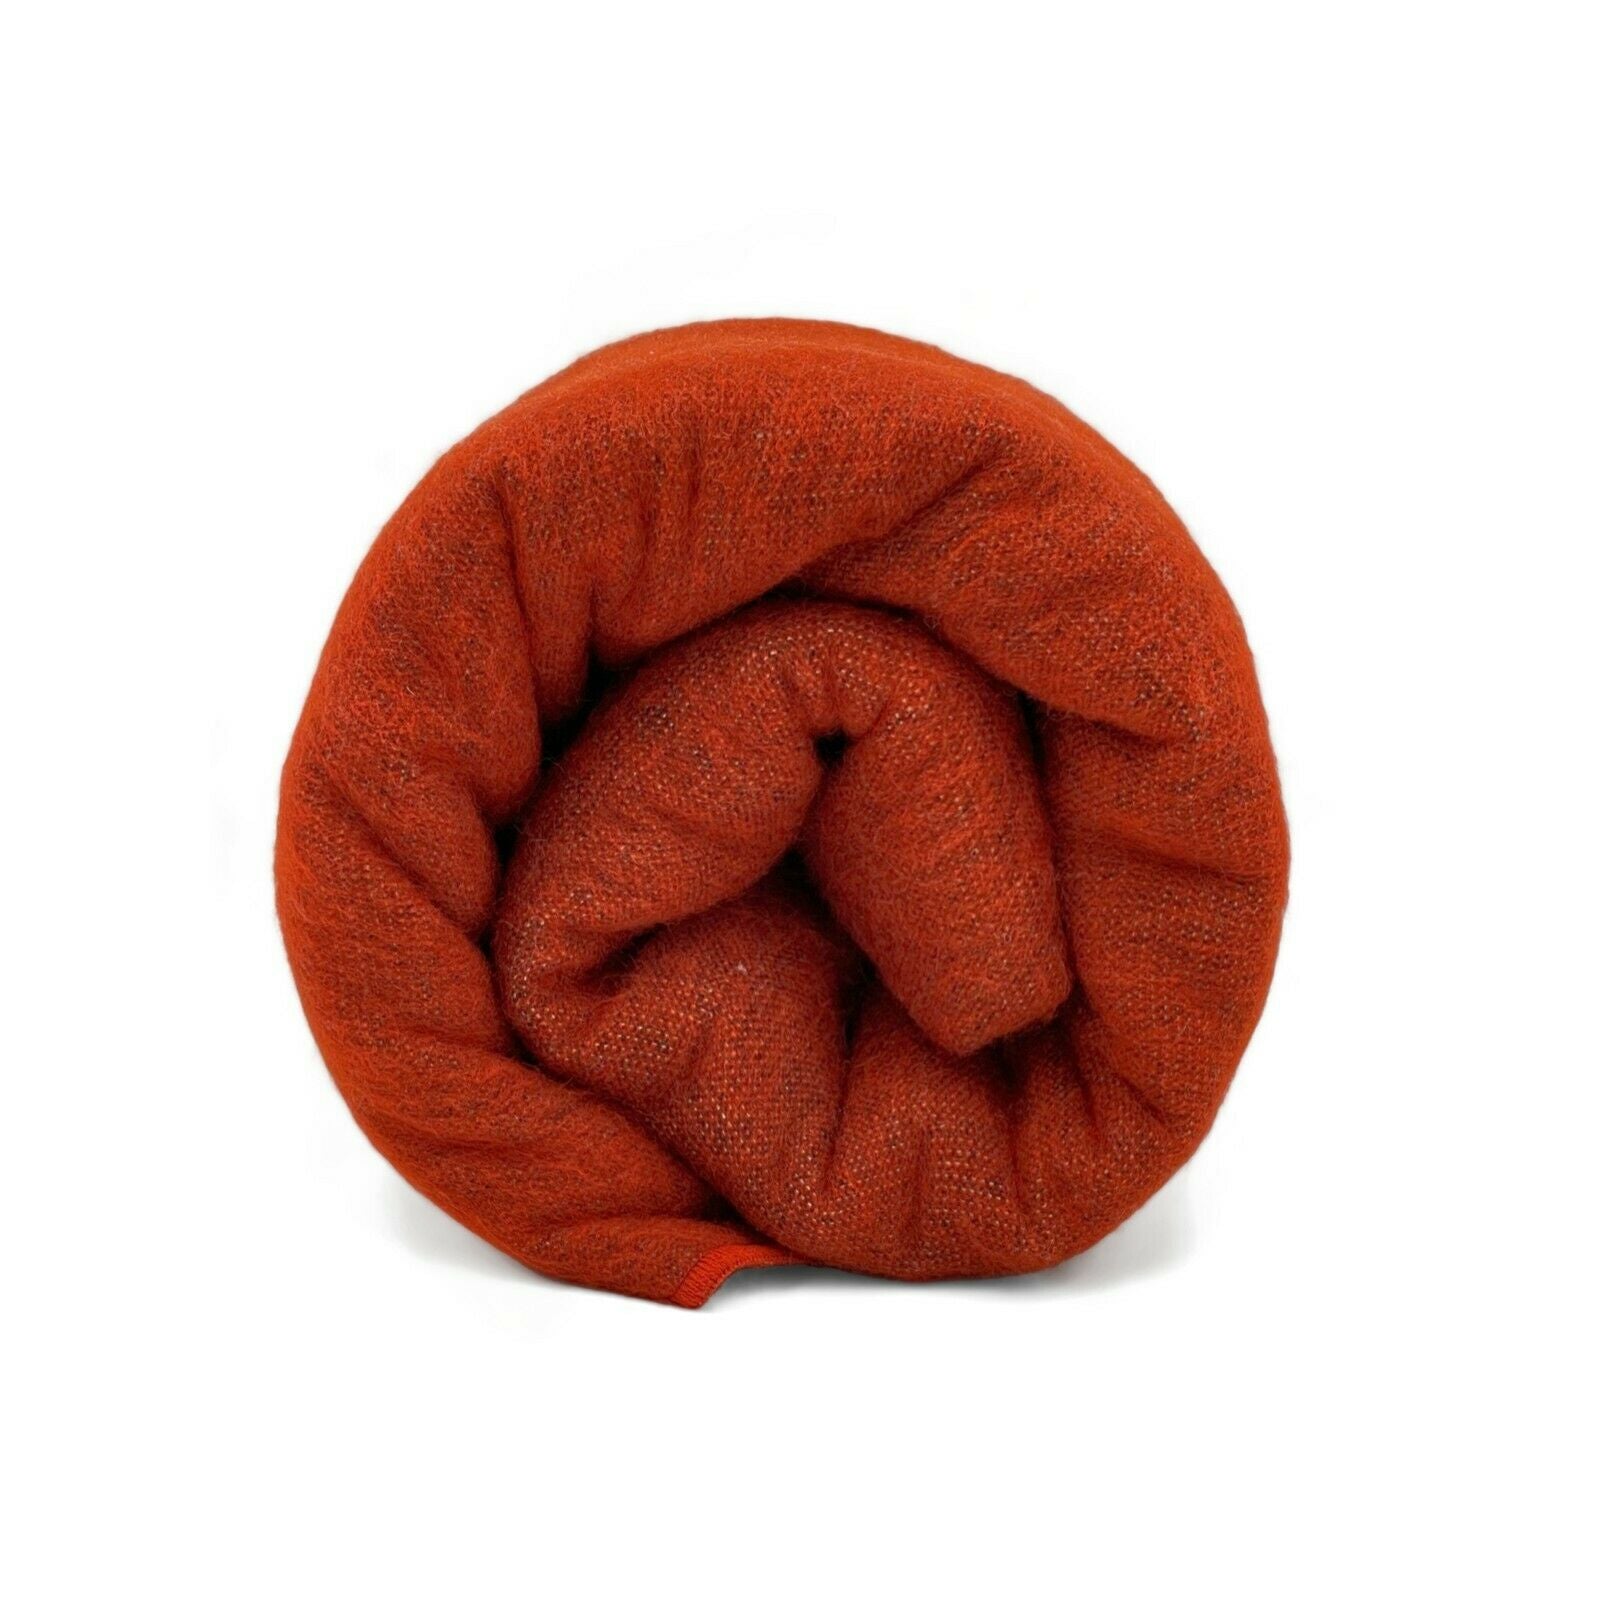 Tunzha - Baby Alpaca Blanket - Extra Large - Solid reversible - terracotta-red